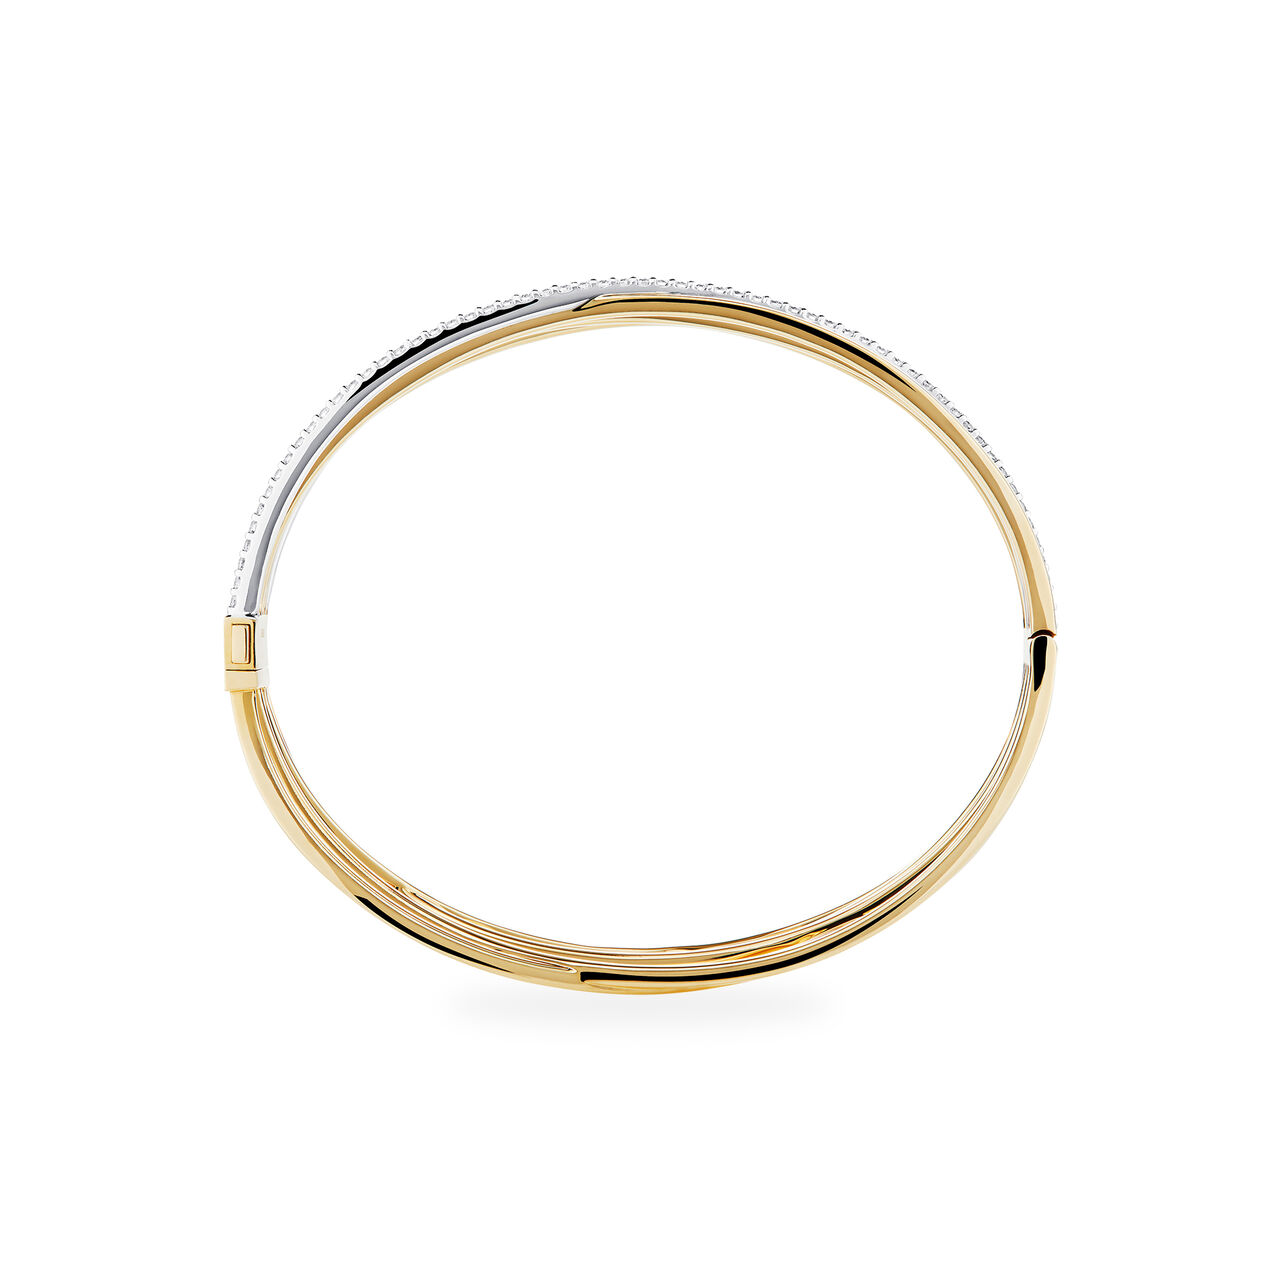 A Gold Bracelet For Women Full Of Diamonds, Suitable For Daily Wear